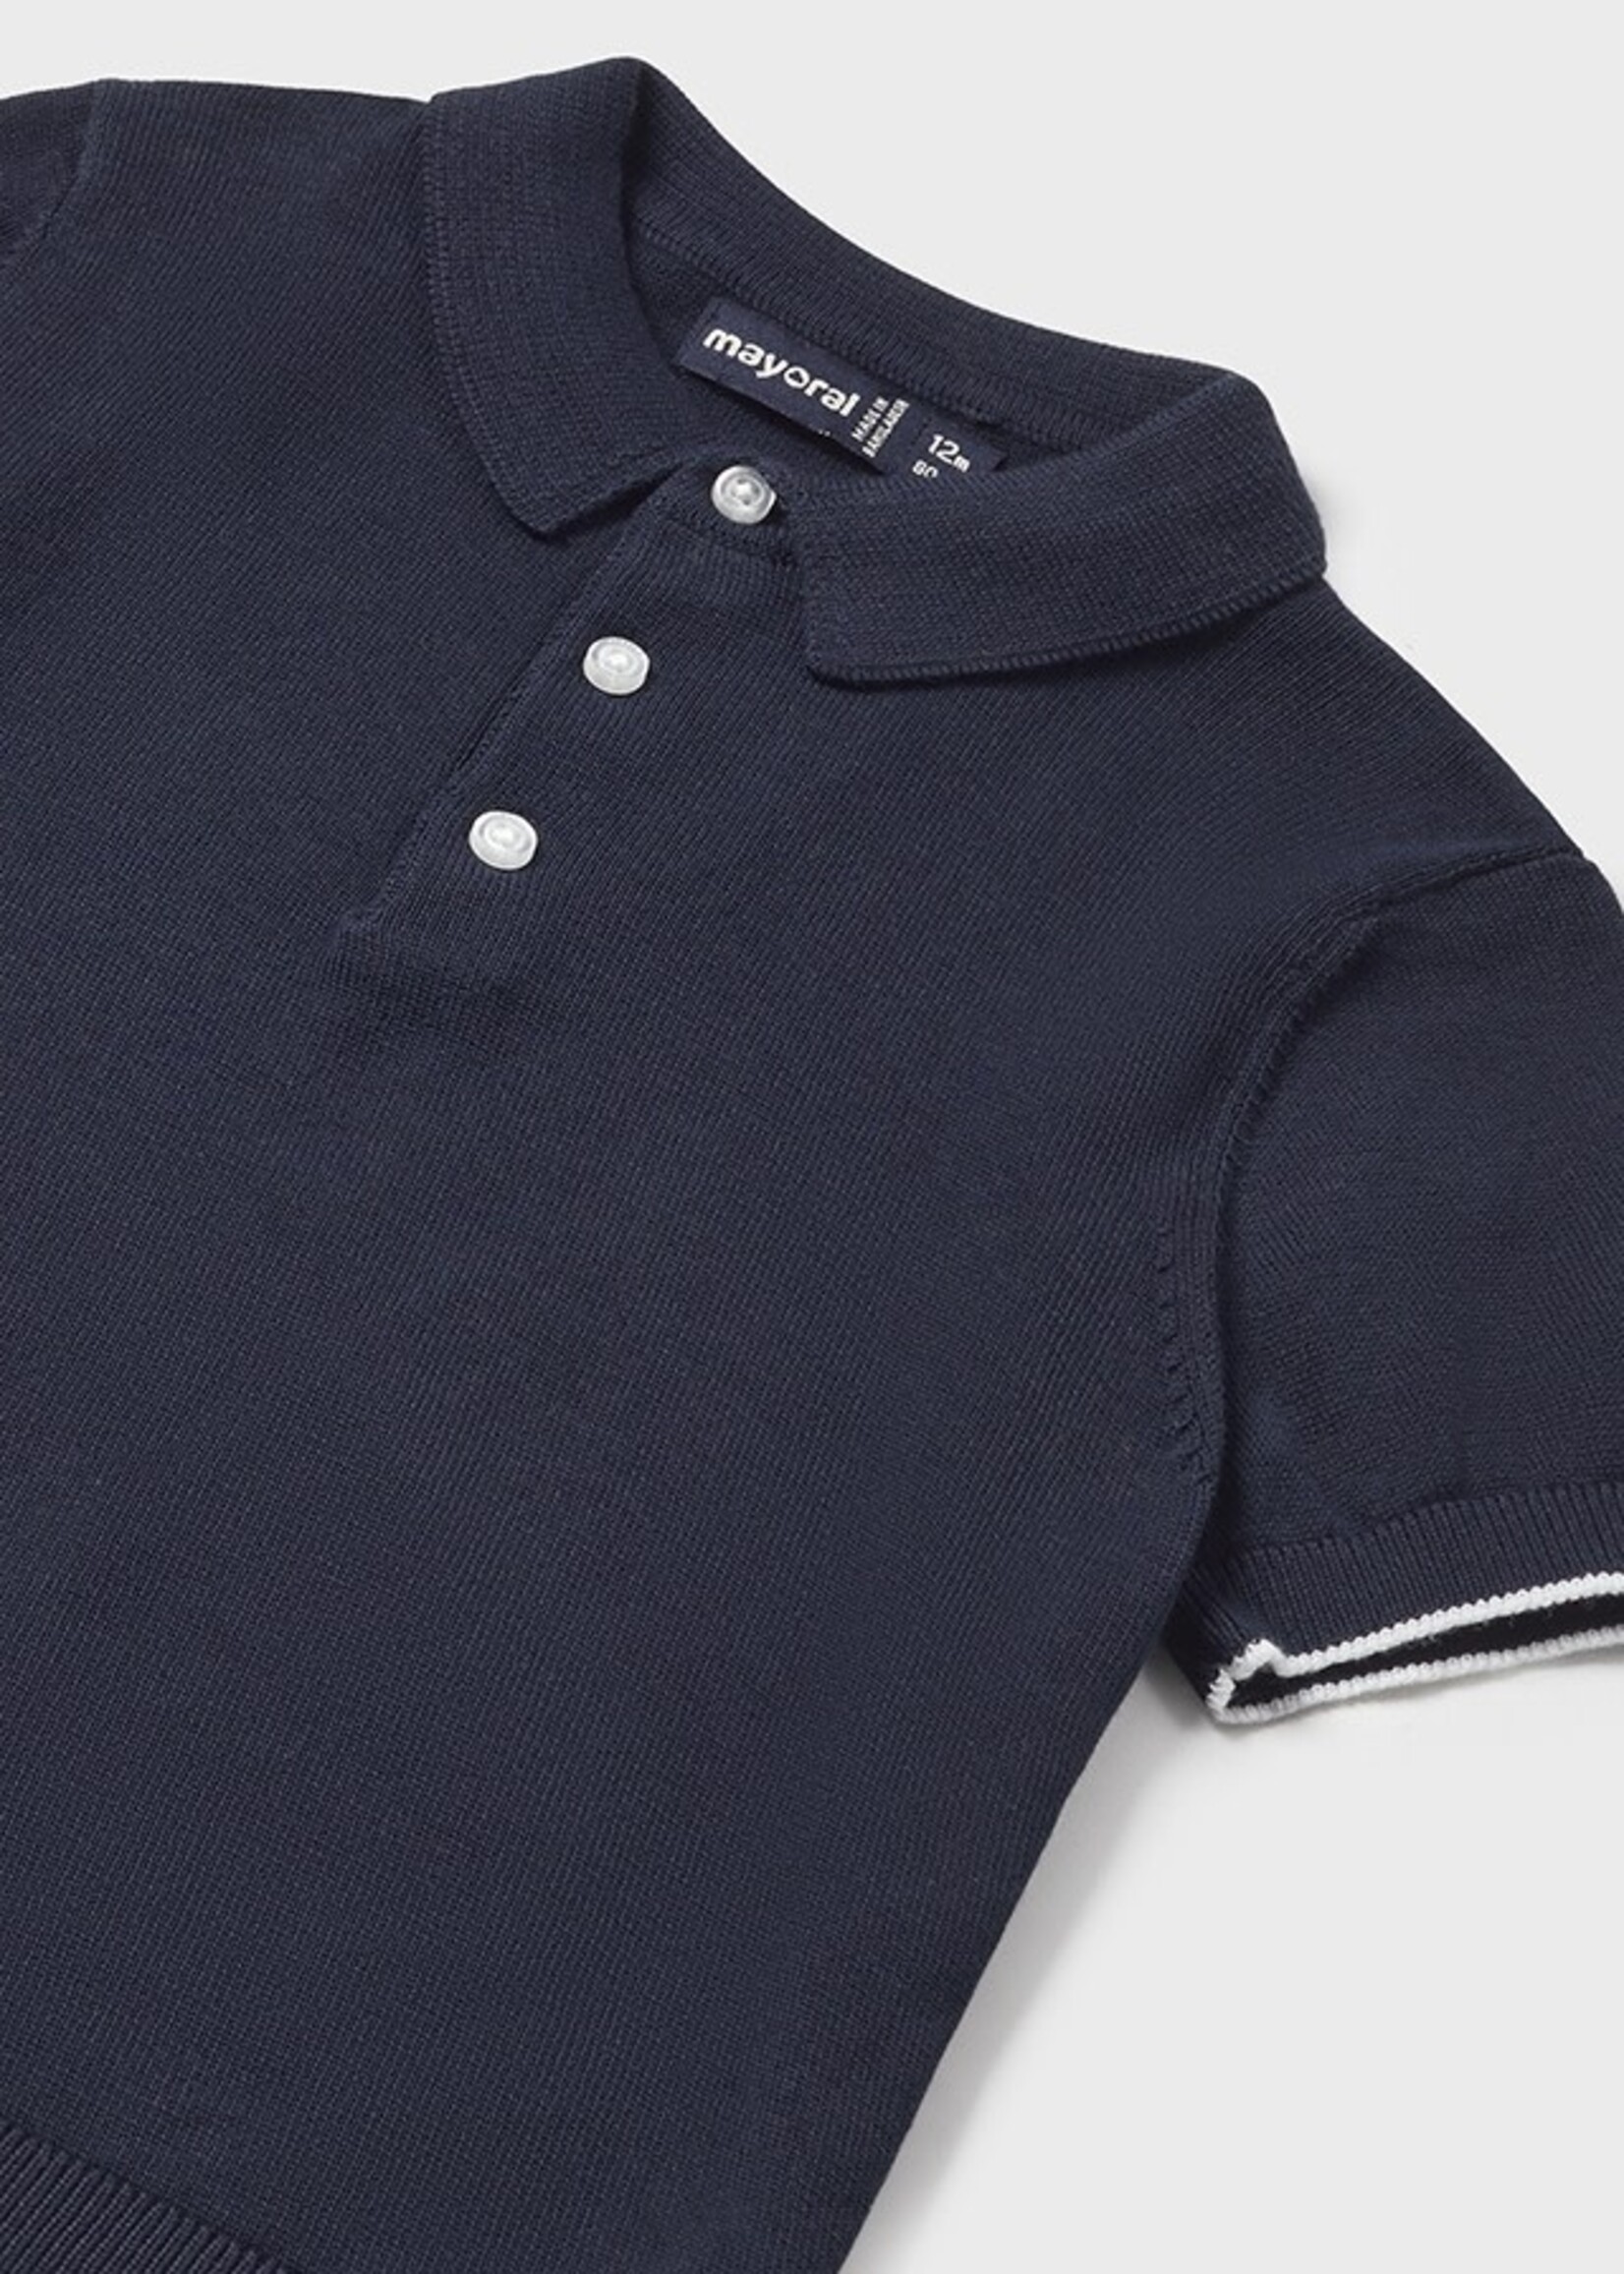 Mayoral Mayoral S/s polo Navy - 24 01105